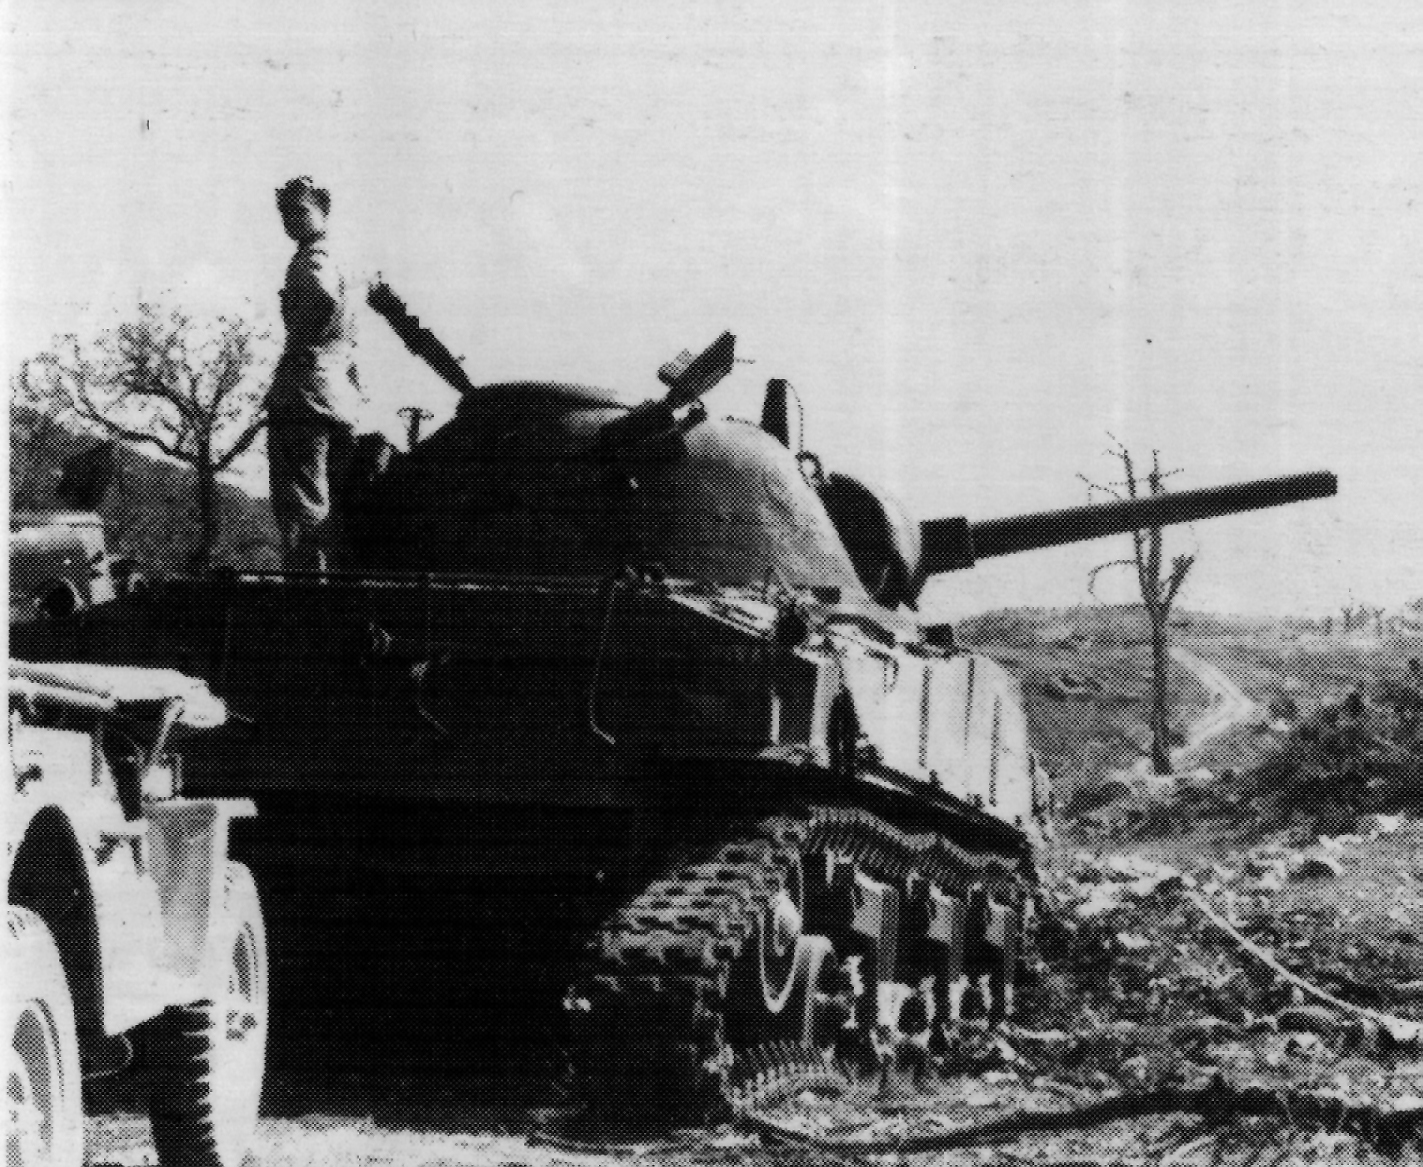 <p class='eng'>Sherman named 'PIRAT' of the CO of the 3rd platoon, 2nd Squadron, 4th Armoured Regiment, damaged by mine.</p>